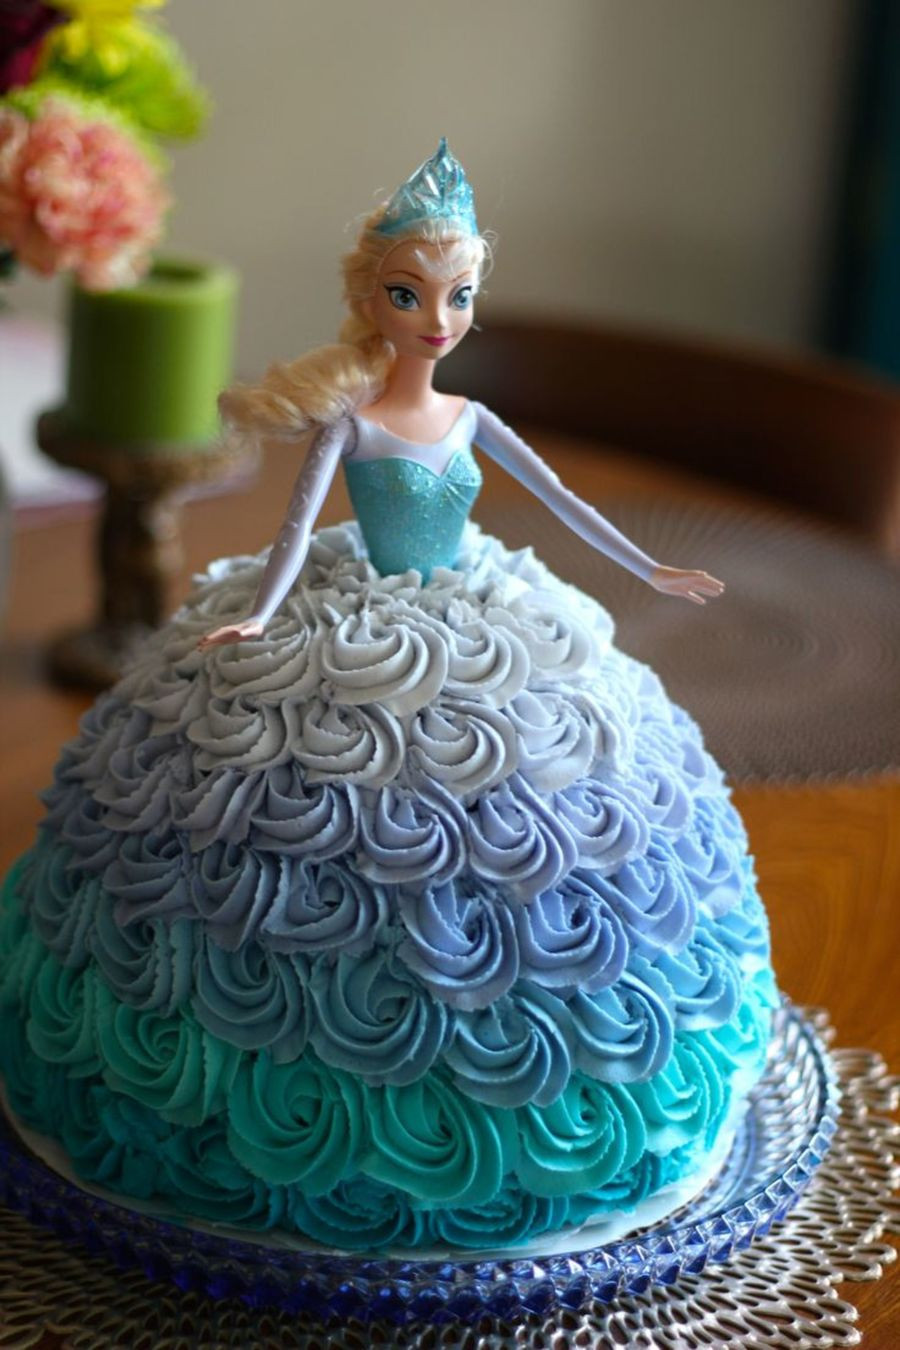 Frozen Birthday Cakes Images
 Elsa Doll Cake For A Frozen Themed Birthday Party